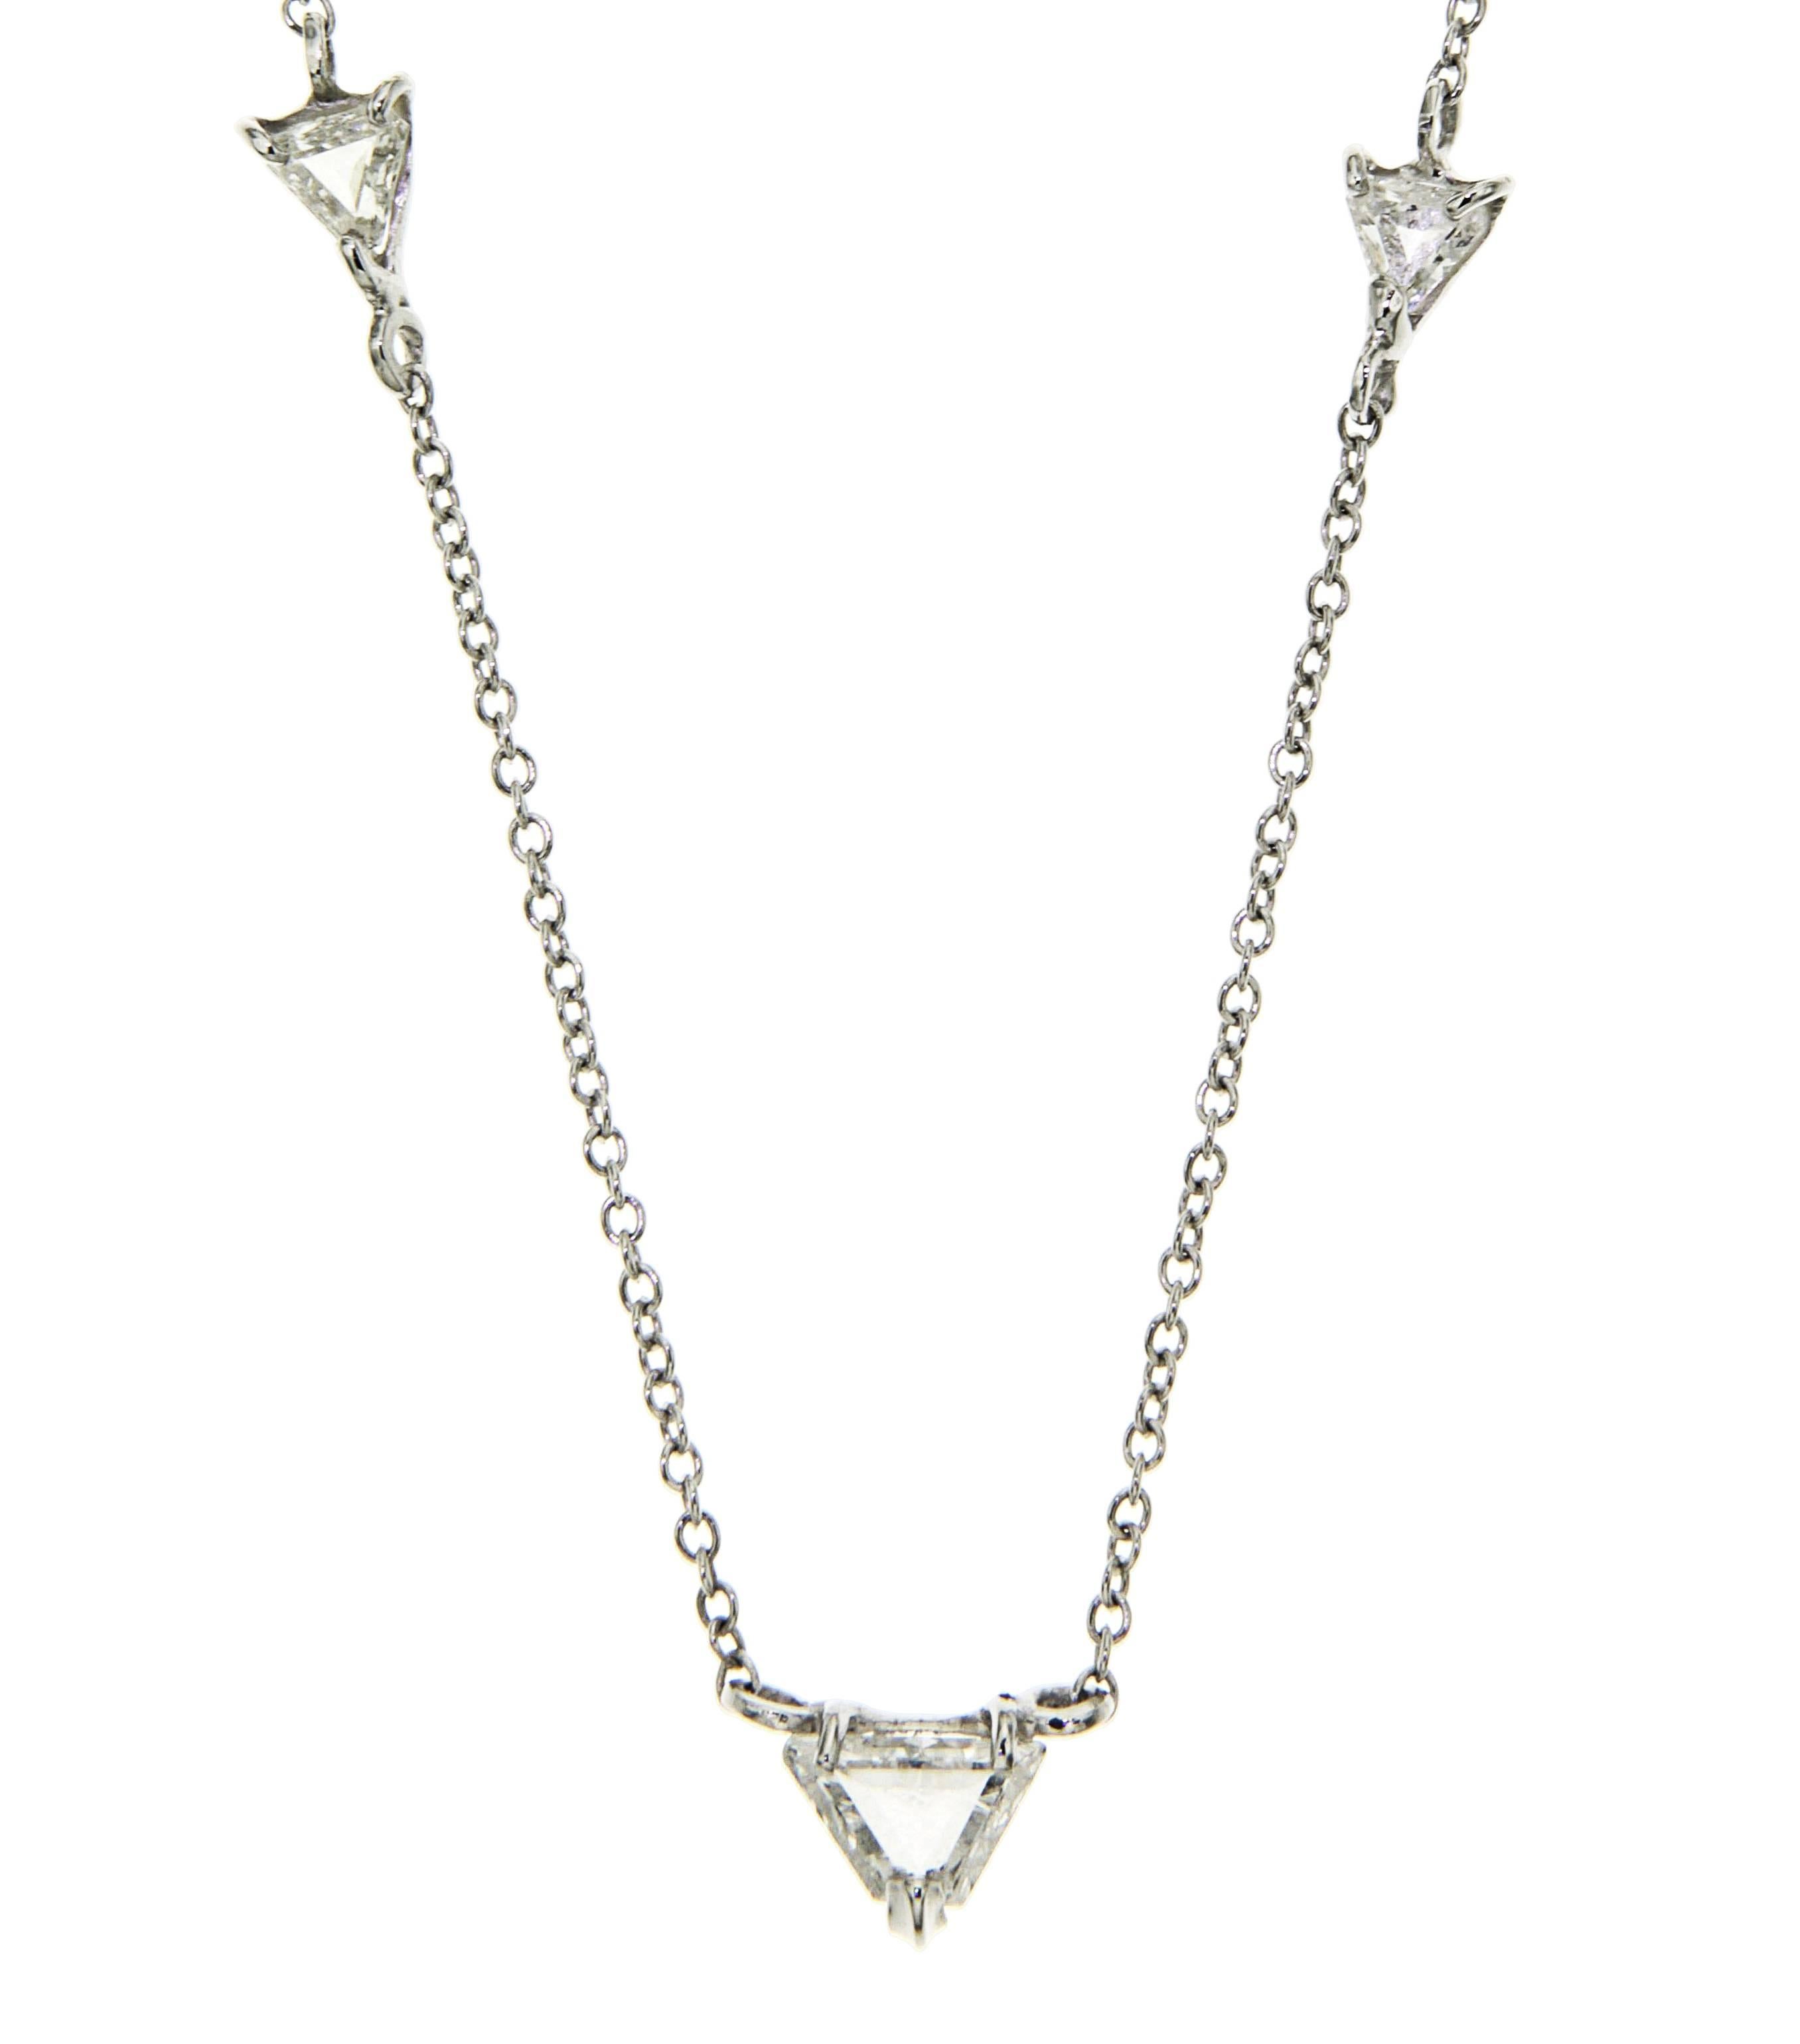 Modern 18 karat white gold necklace with 3 triangle cut diamonds color F clarity VVS1. Central Diamond 0.40 ctw / Lateral Diamonds 0.20 ctw. Total choker length is 400 mm. / 15.748 inches. It is marked with the Italian Gold Mark 750 and Botta